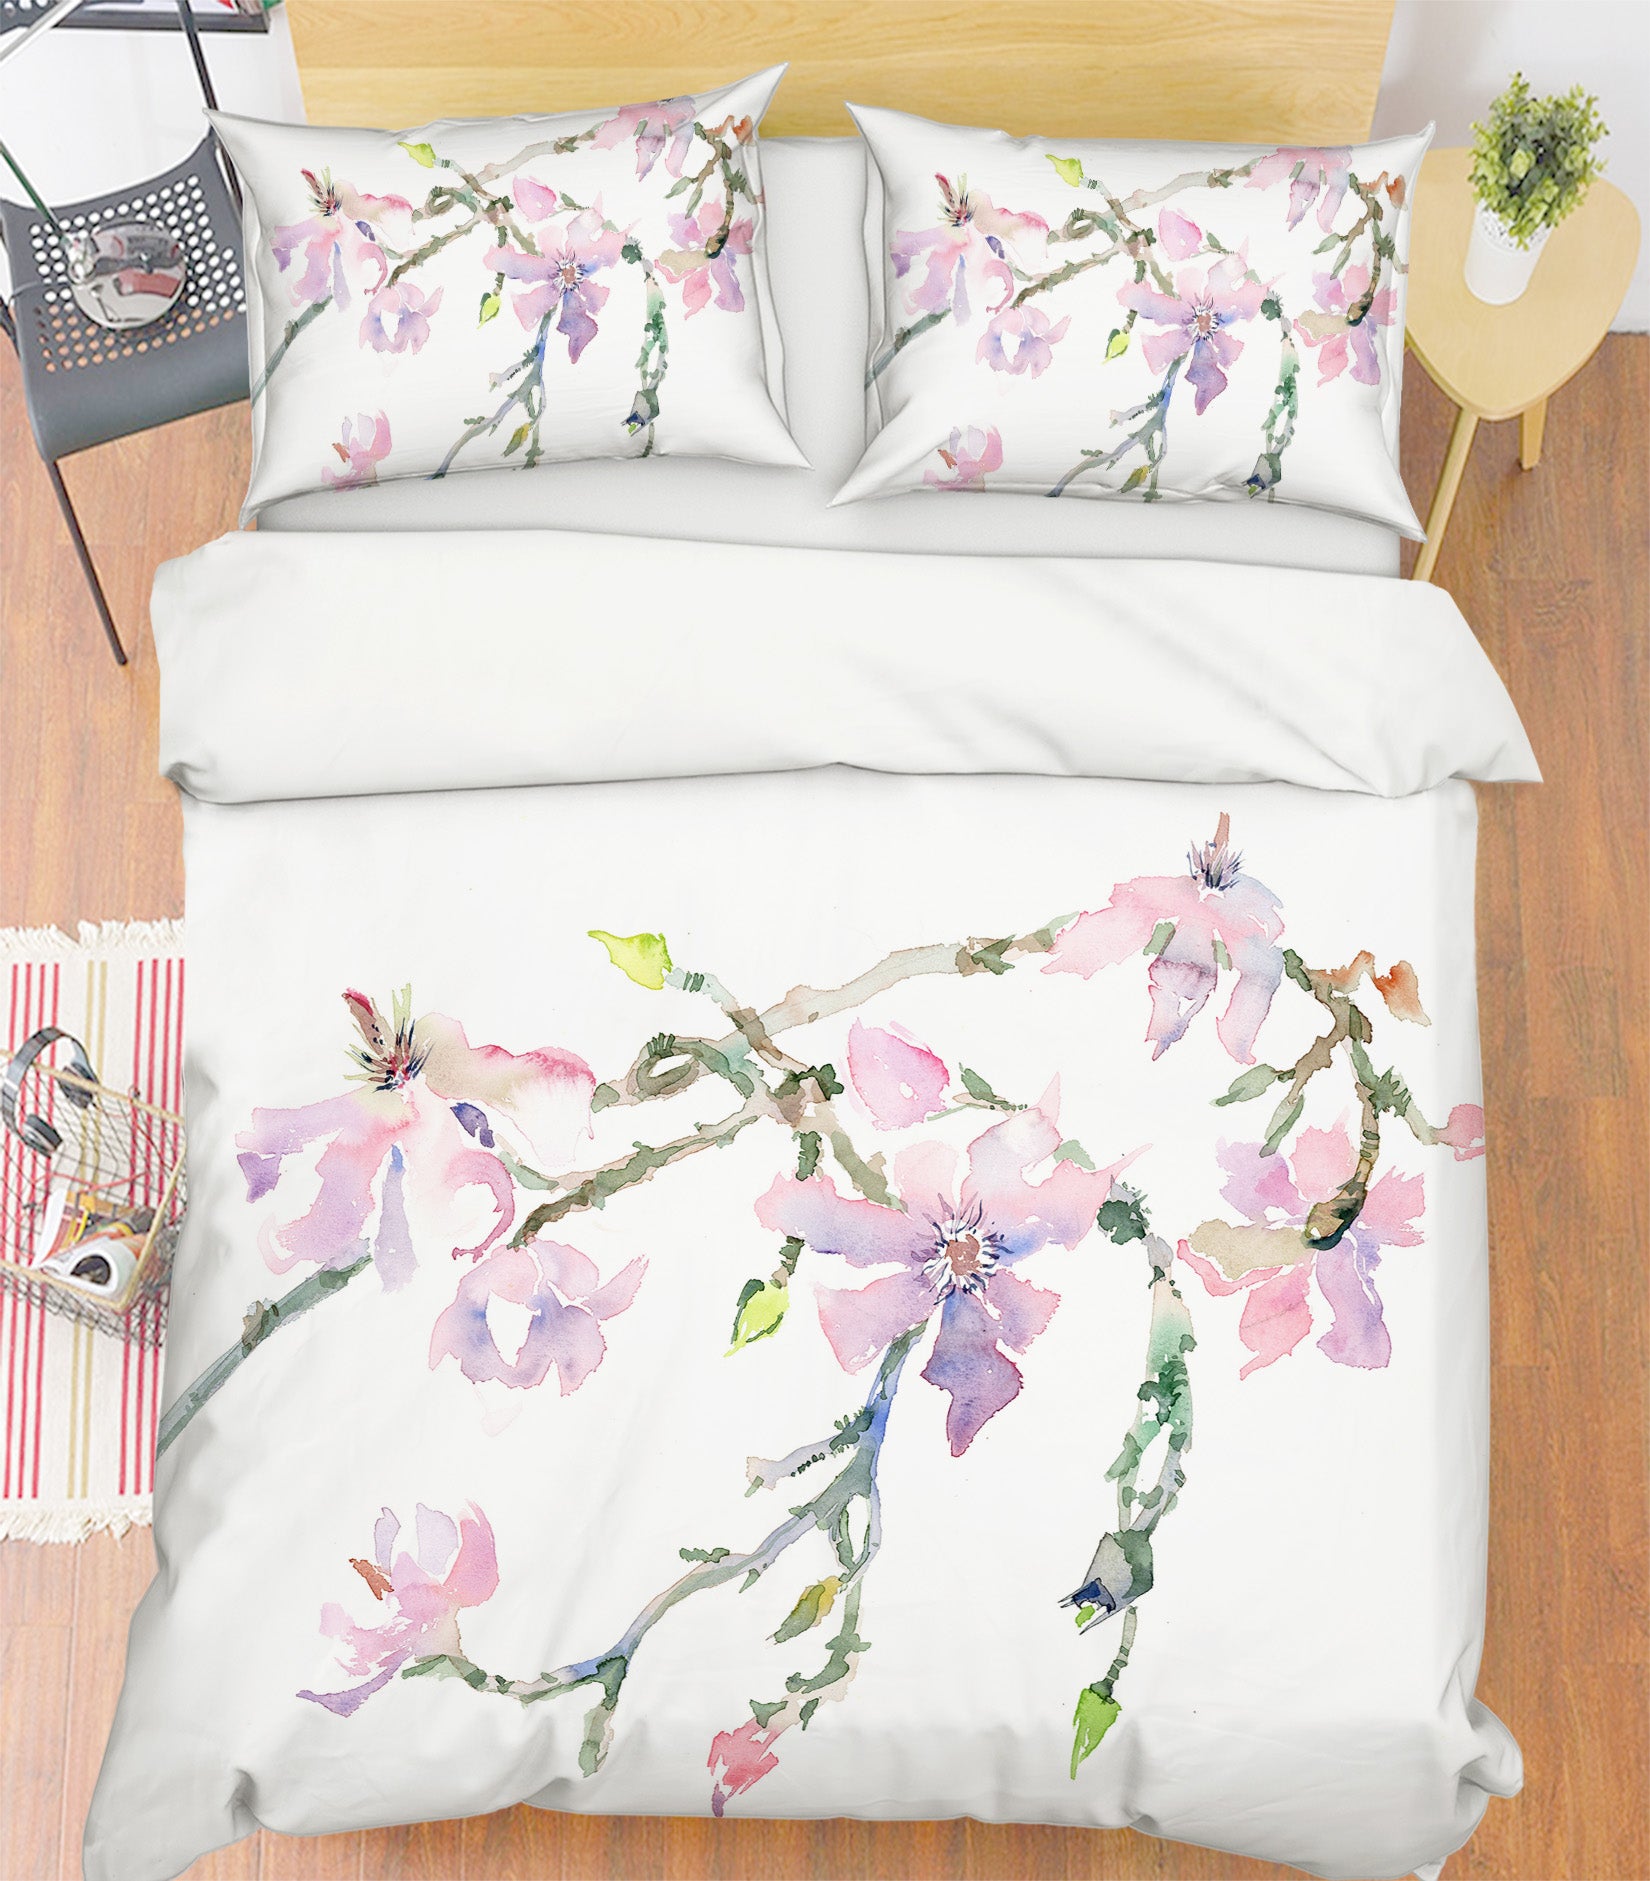 3D Peach Blossom 2006 Anne Farrall Doyle Bedding Bed Pillowcases Quilt